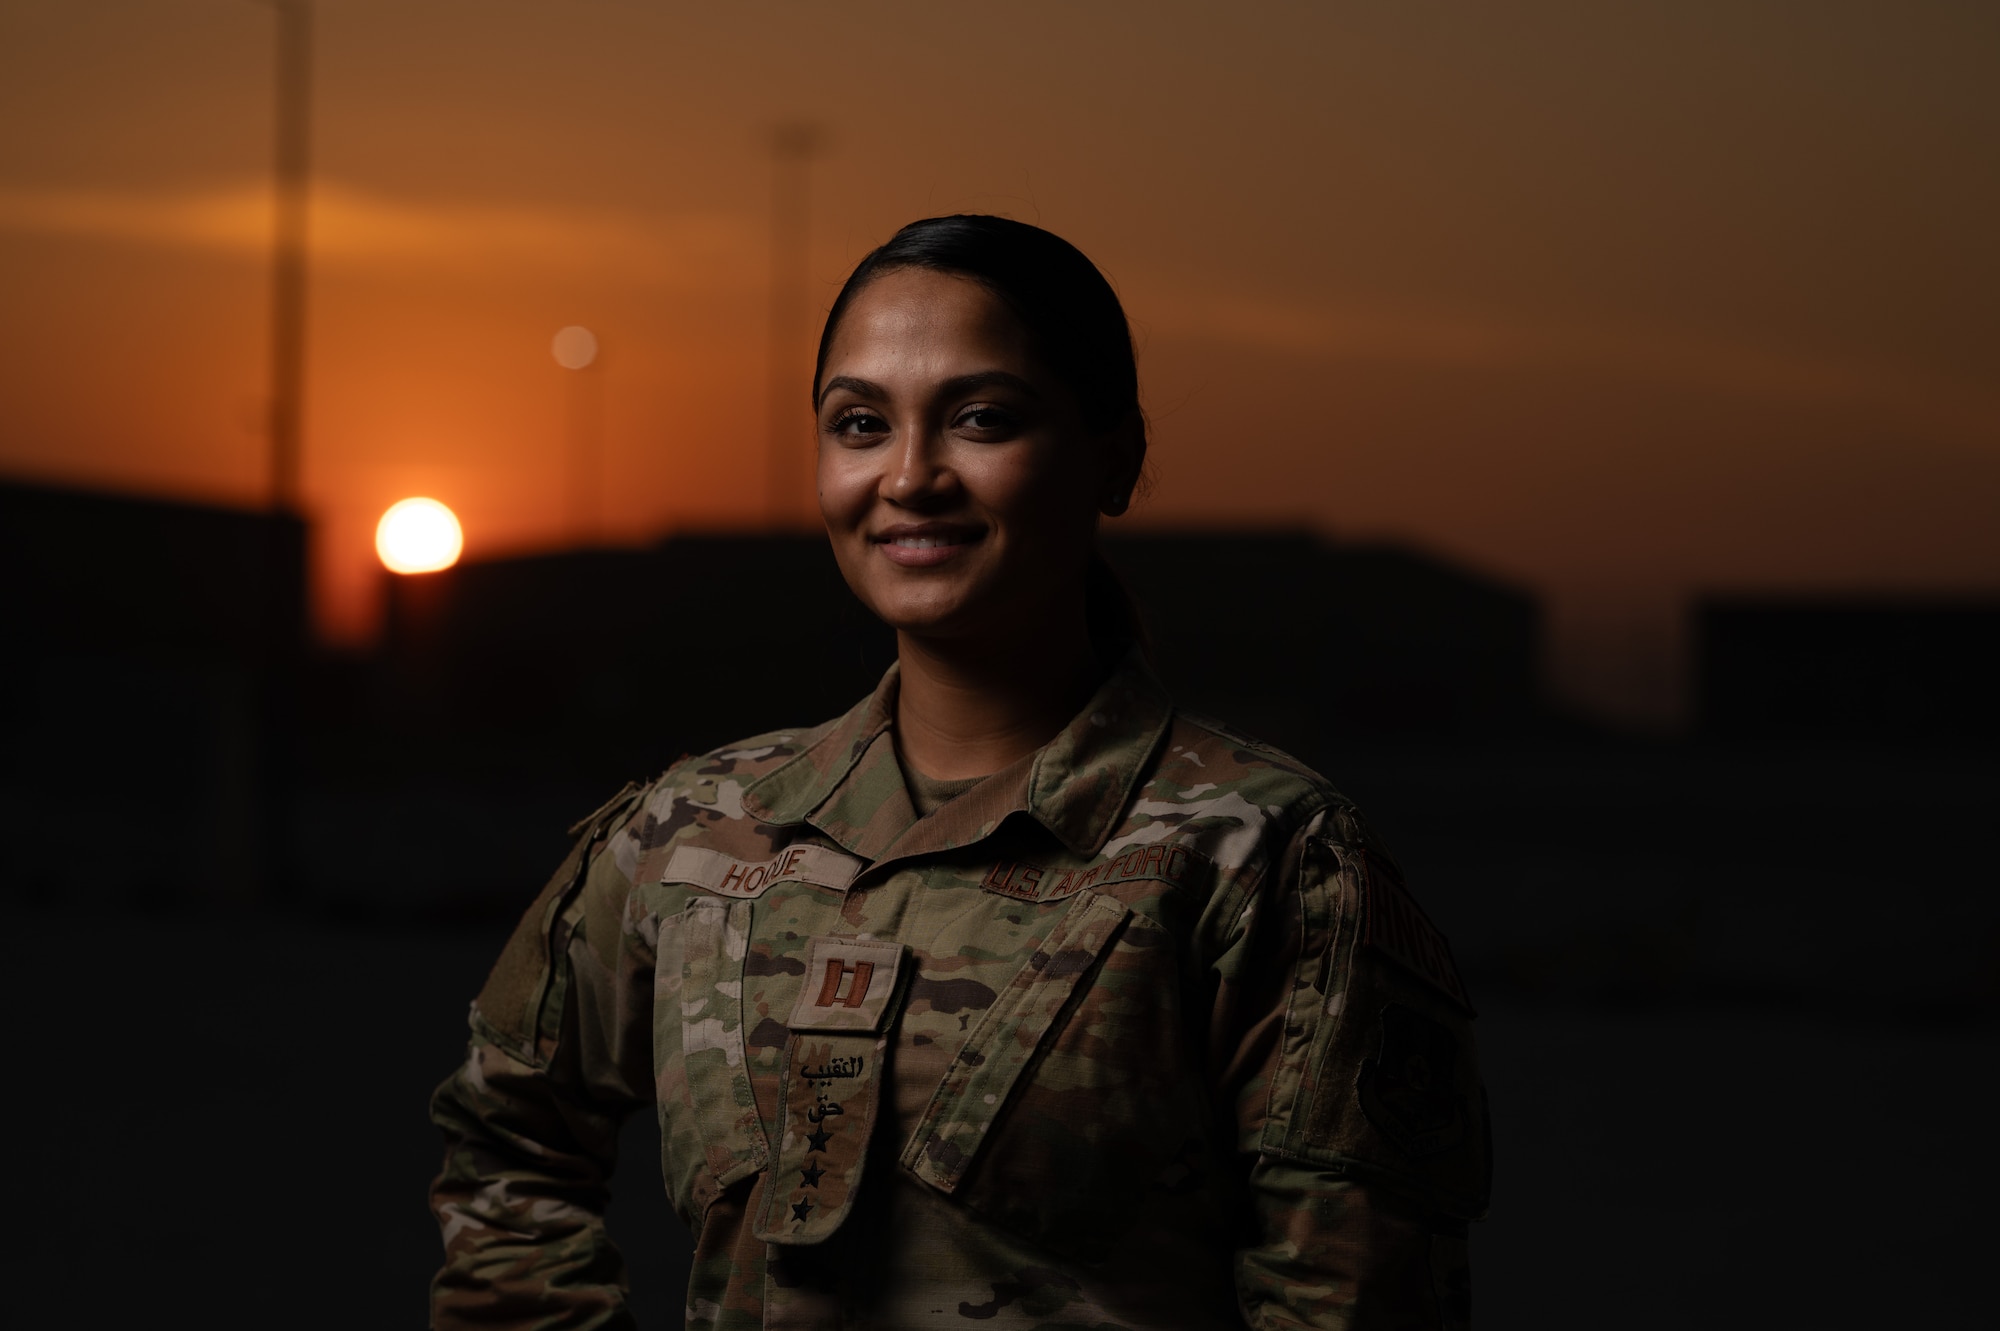 U.S. Air Force Capt. Nahima Hoque, Host Nation Coordination Cell Plans and Programs officer in charge and Public Health flight commander, poses for a photo at an undisclosed location in the U.S. Central Command area of responsibility, Dec. 08, 2023. Hoque is a Language Enable Airman Program scholar working with HNCC to provided Arabic translation services and cultural advice between base and host nation leaders. (U.S. Air Force photo by Airman 1st Class Stassney Davis)